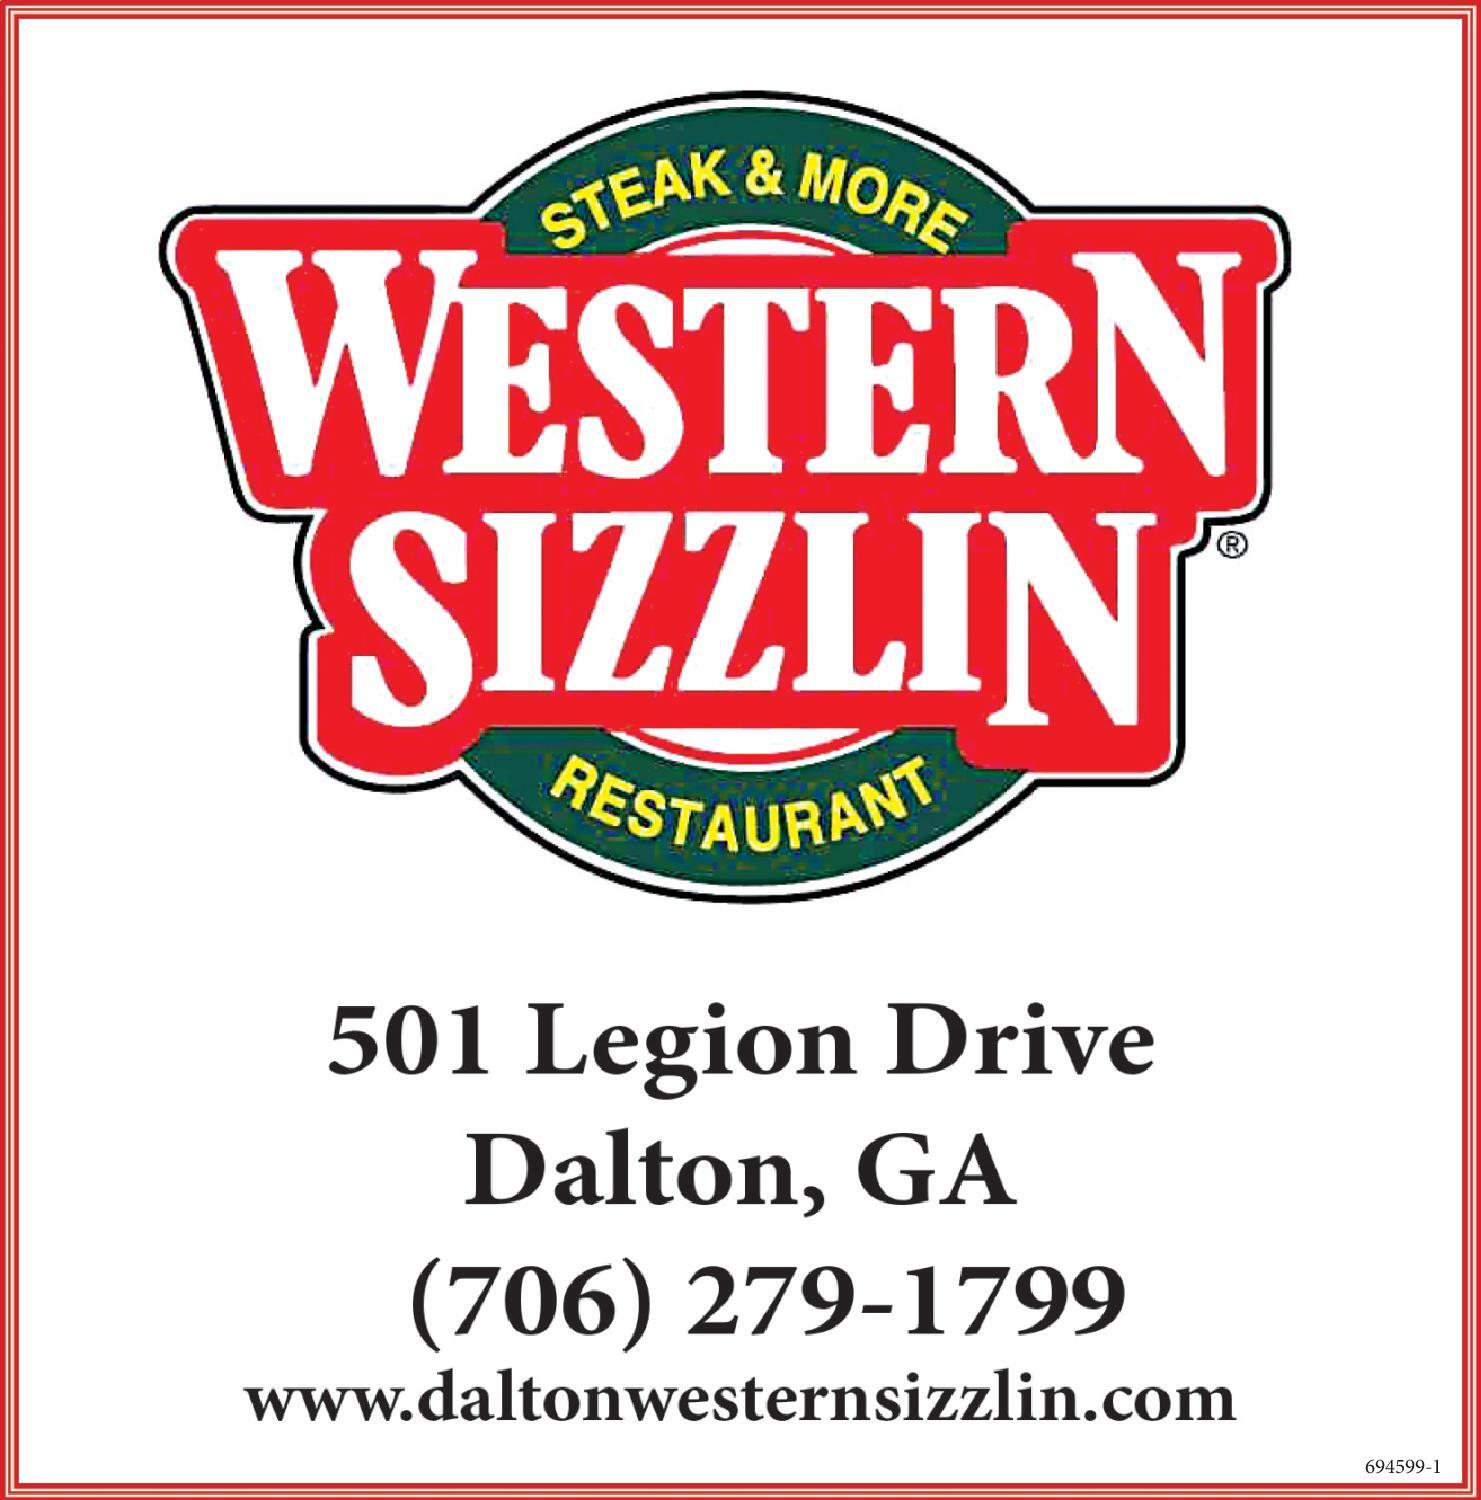 The Daily Citizen | Newspaper Ads | Classifieds | Dining & Entertainment |  STEAK & MORE